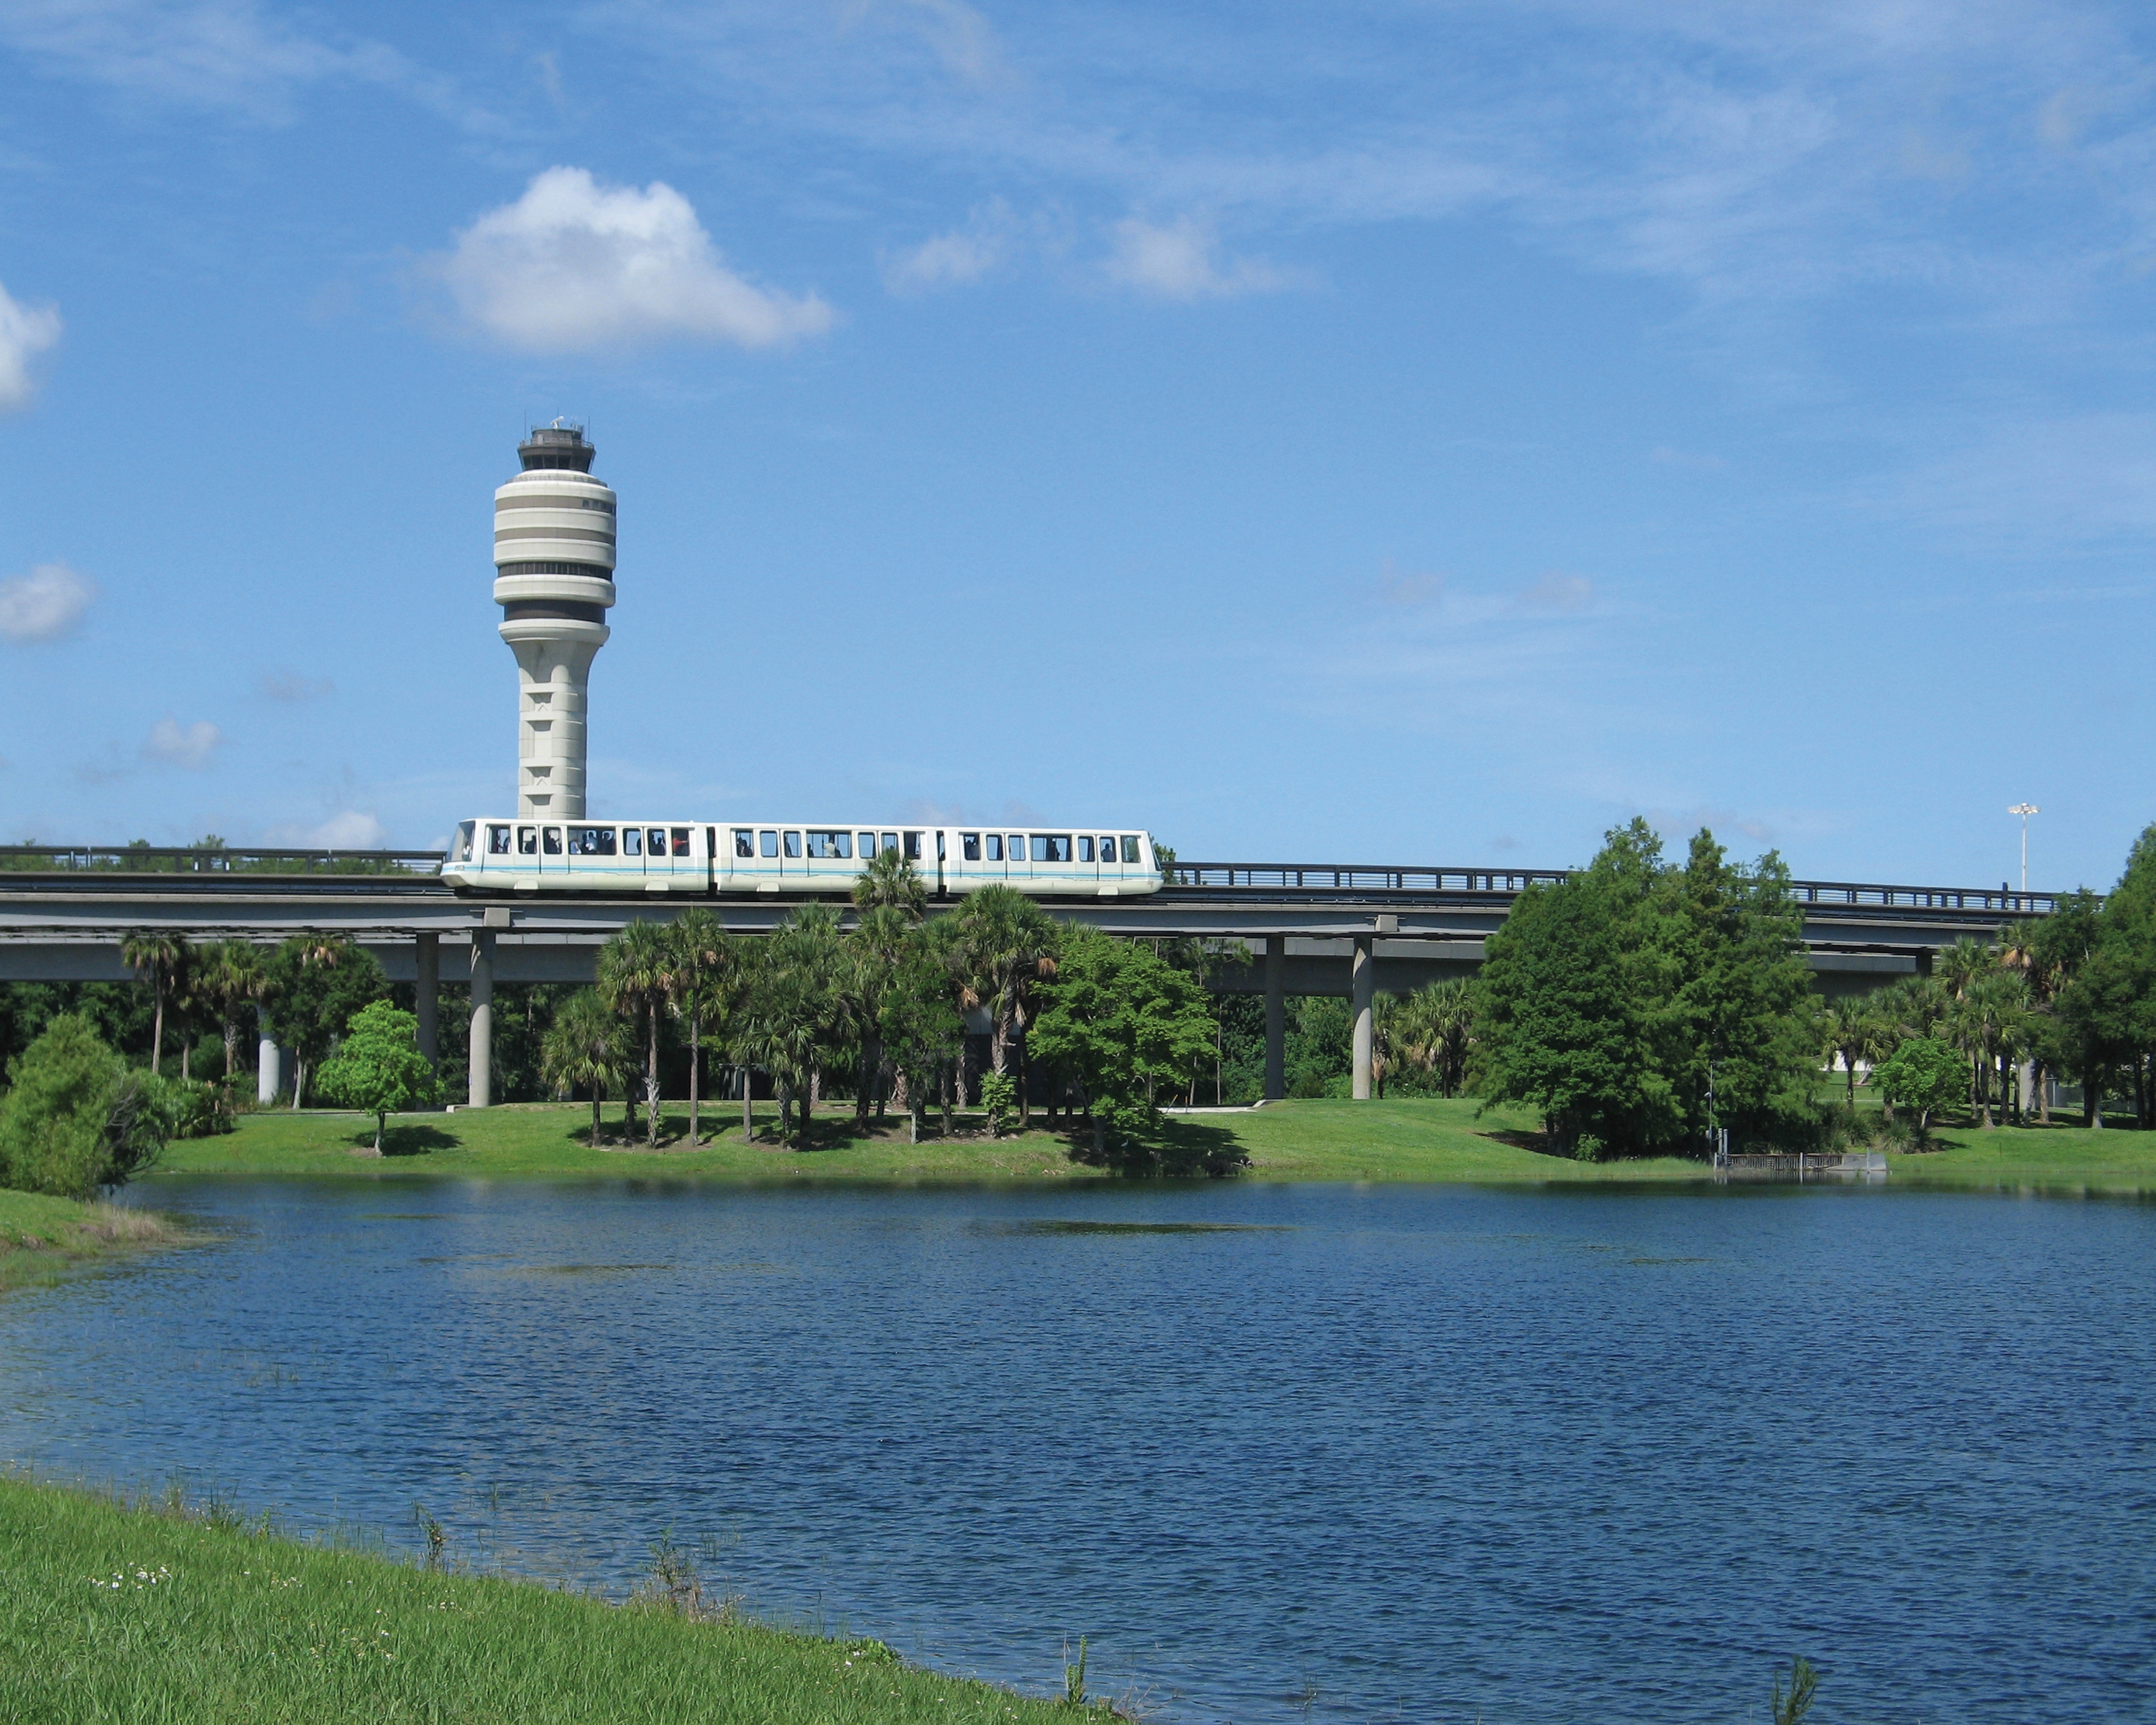 FAA Tower with AGT Across Lake